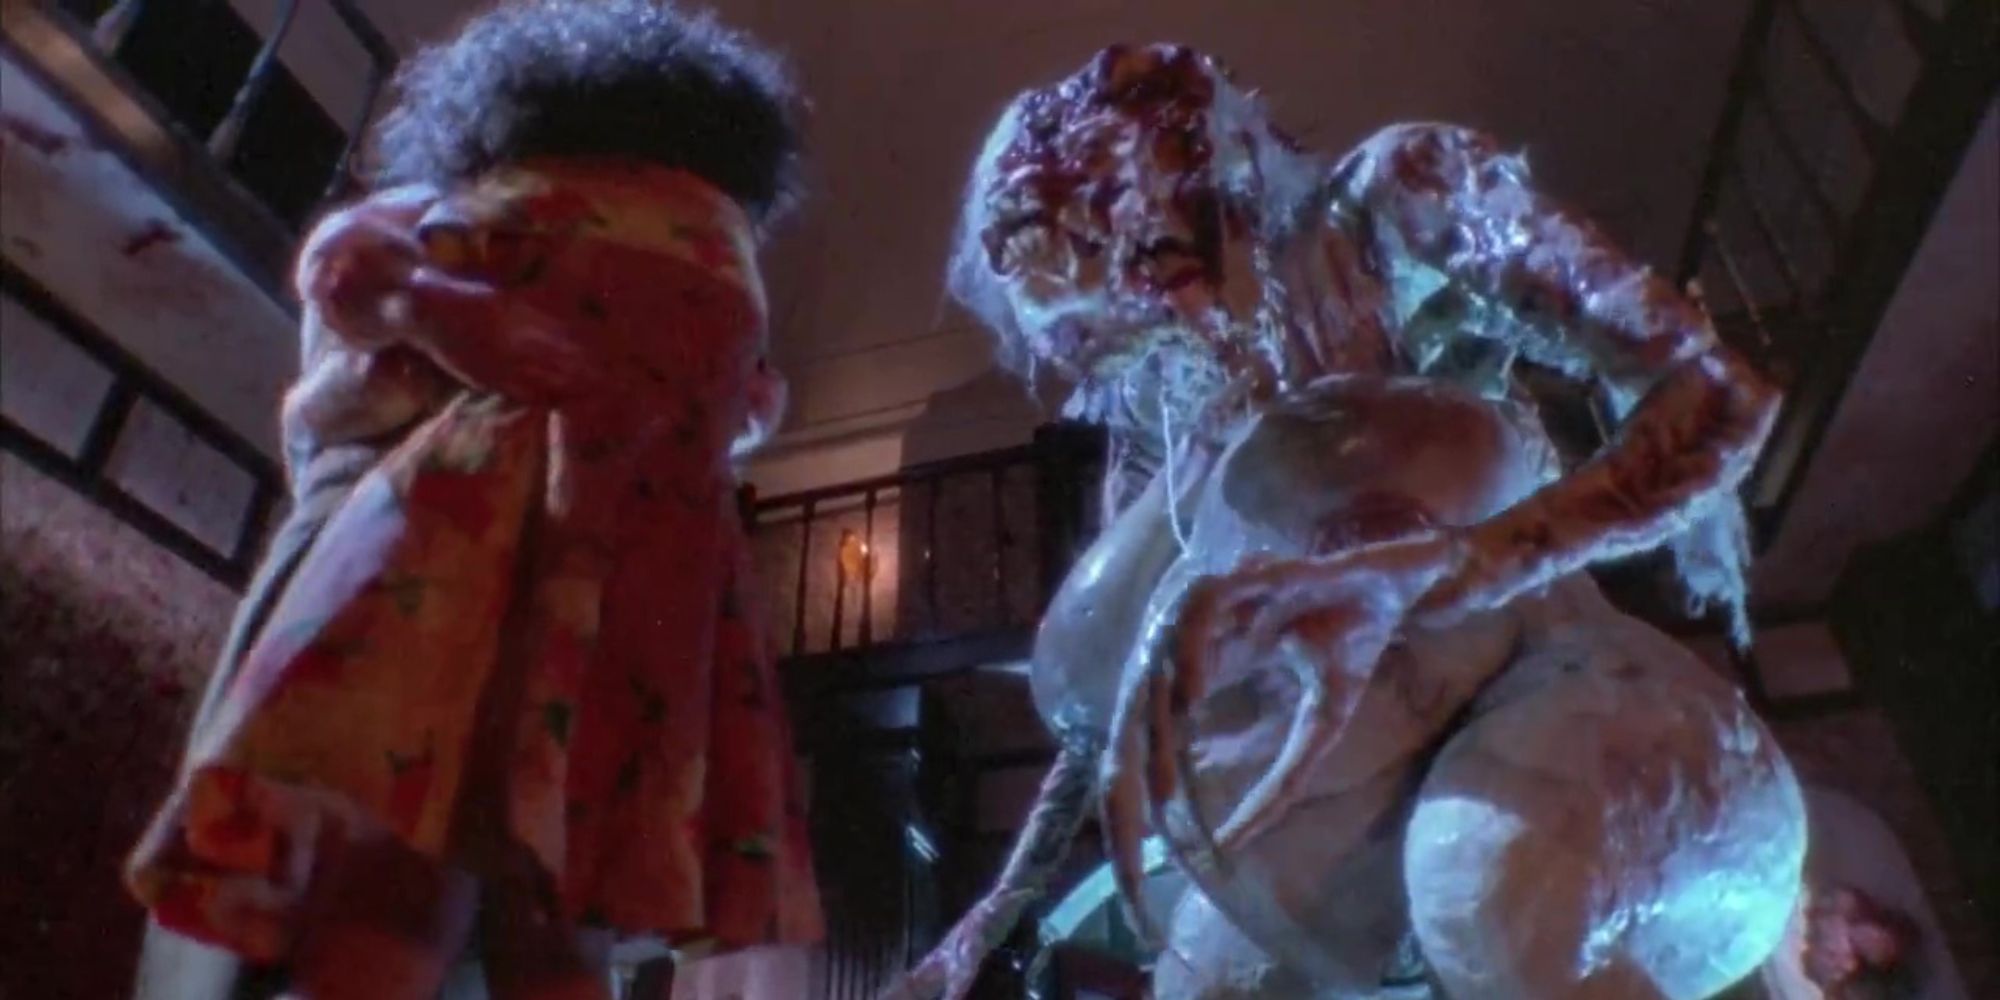 The Mommy monster in Braindead